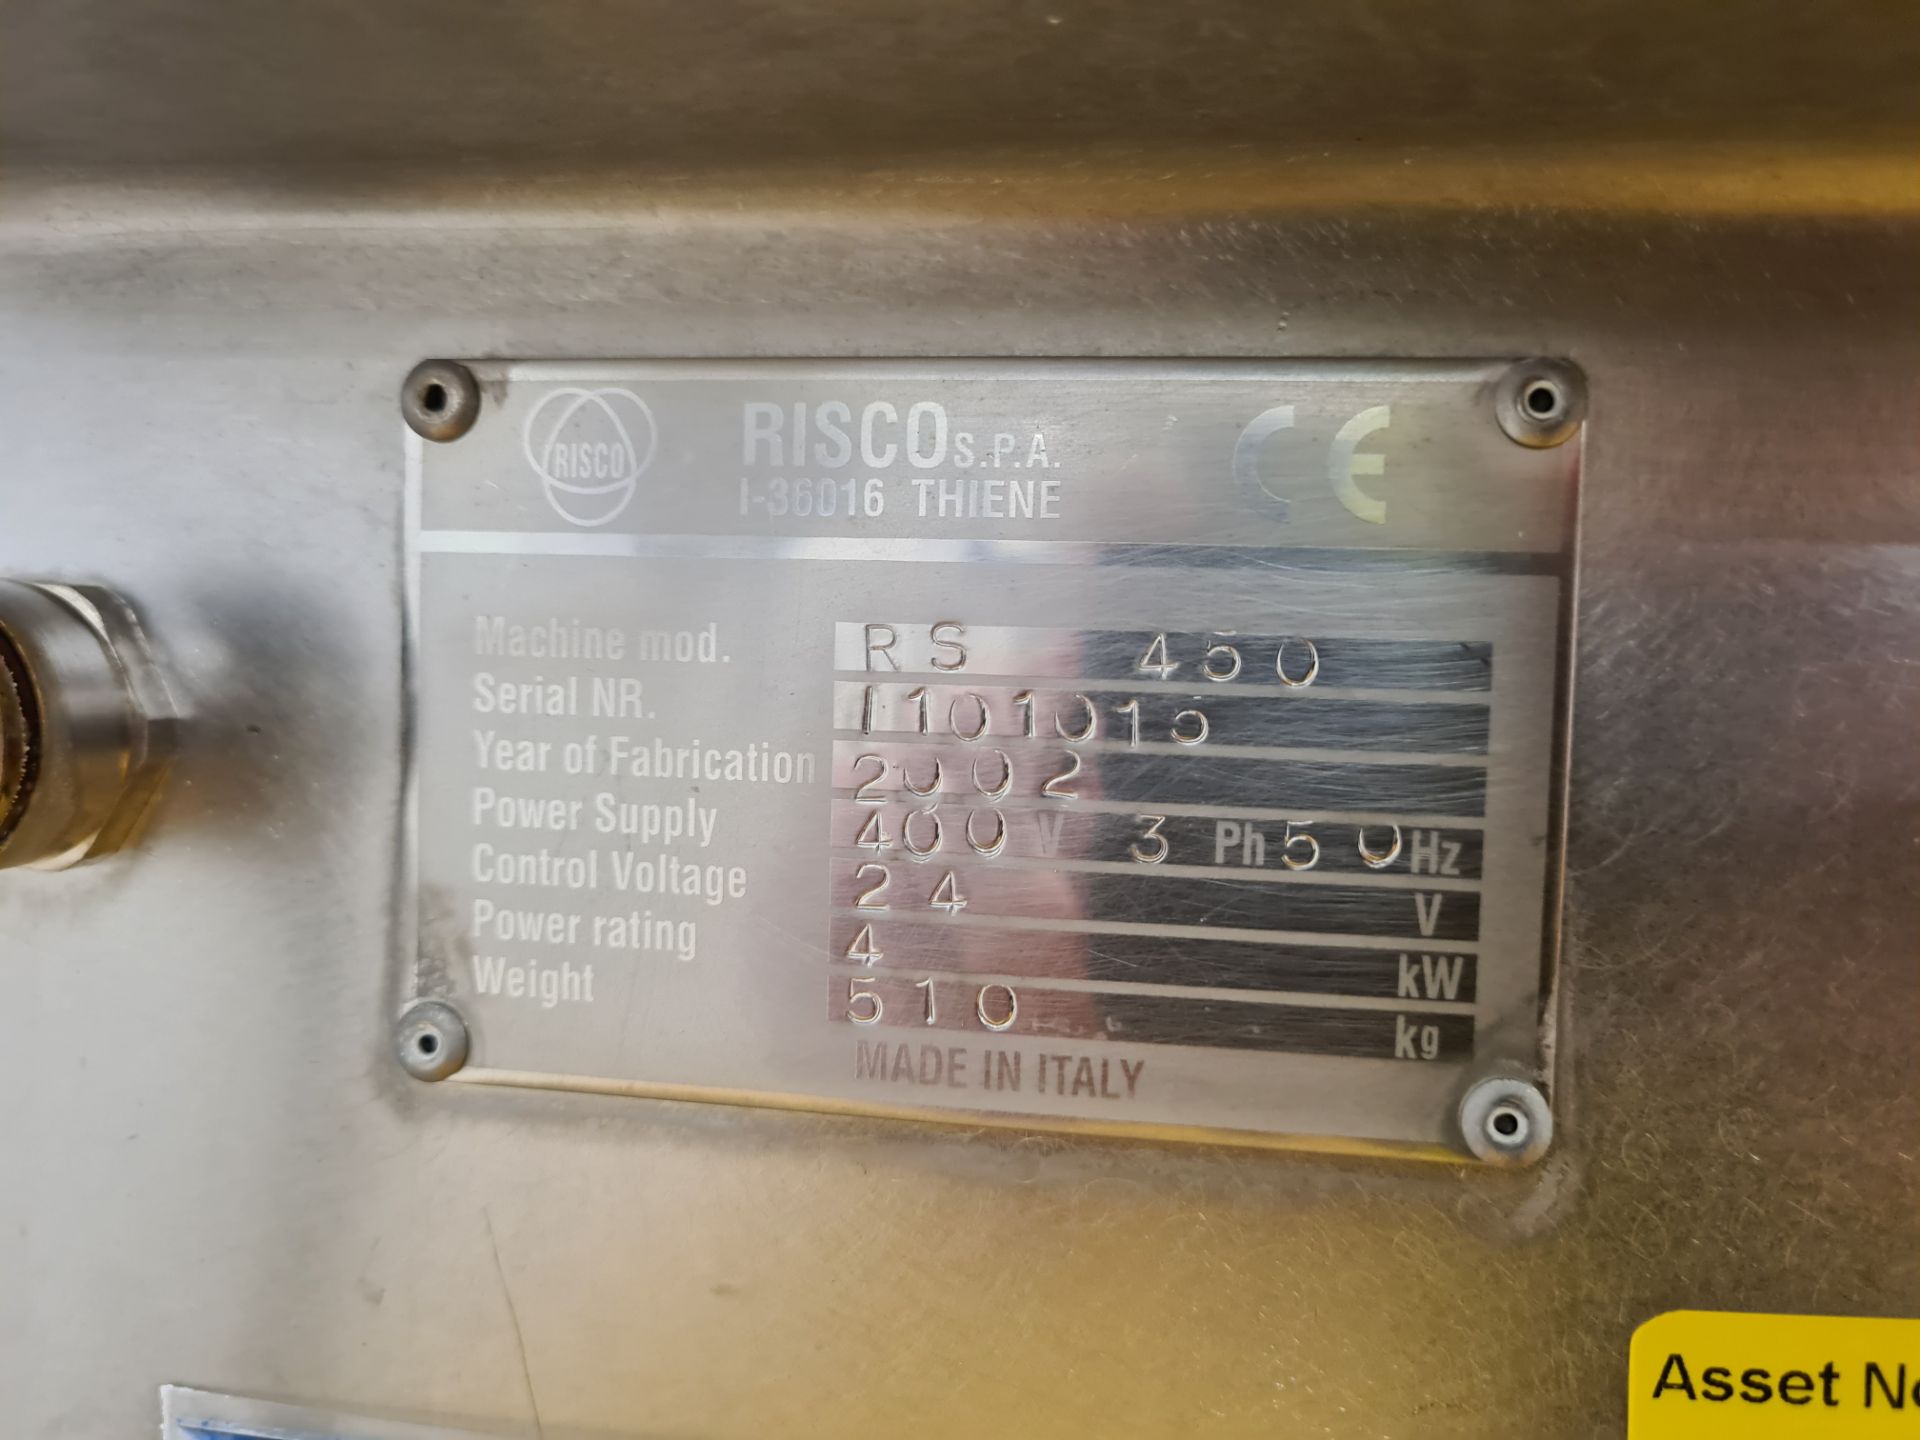 Risco RS450 STAINLESS STEEL MIXER, serial no. 1101010, year of manufacture 2002, weight 510kg, - Image 5 of 6